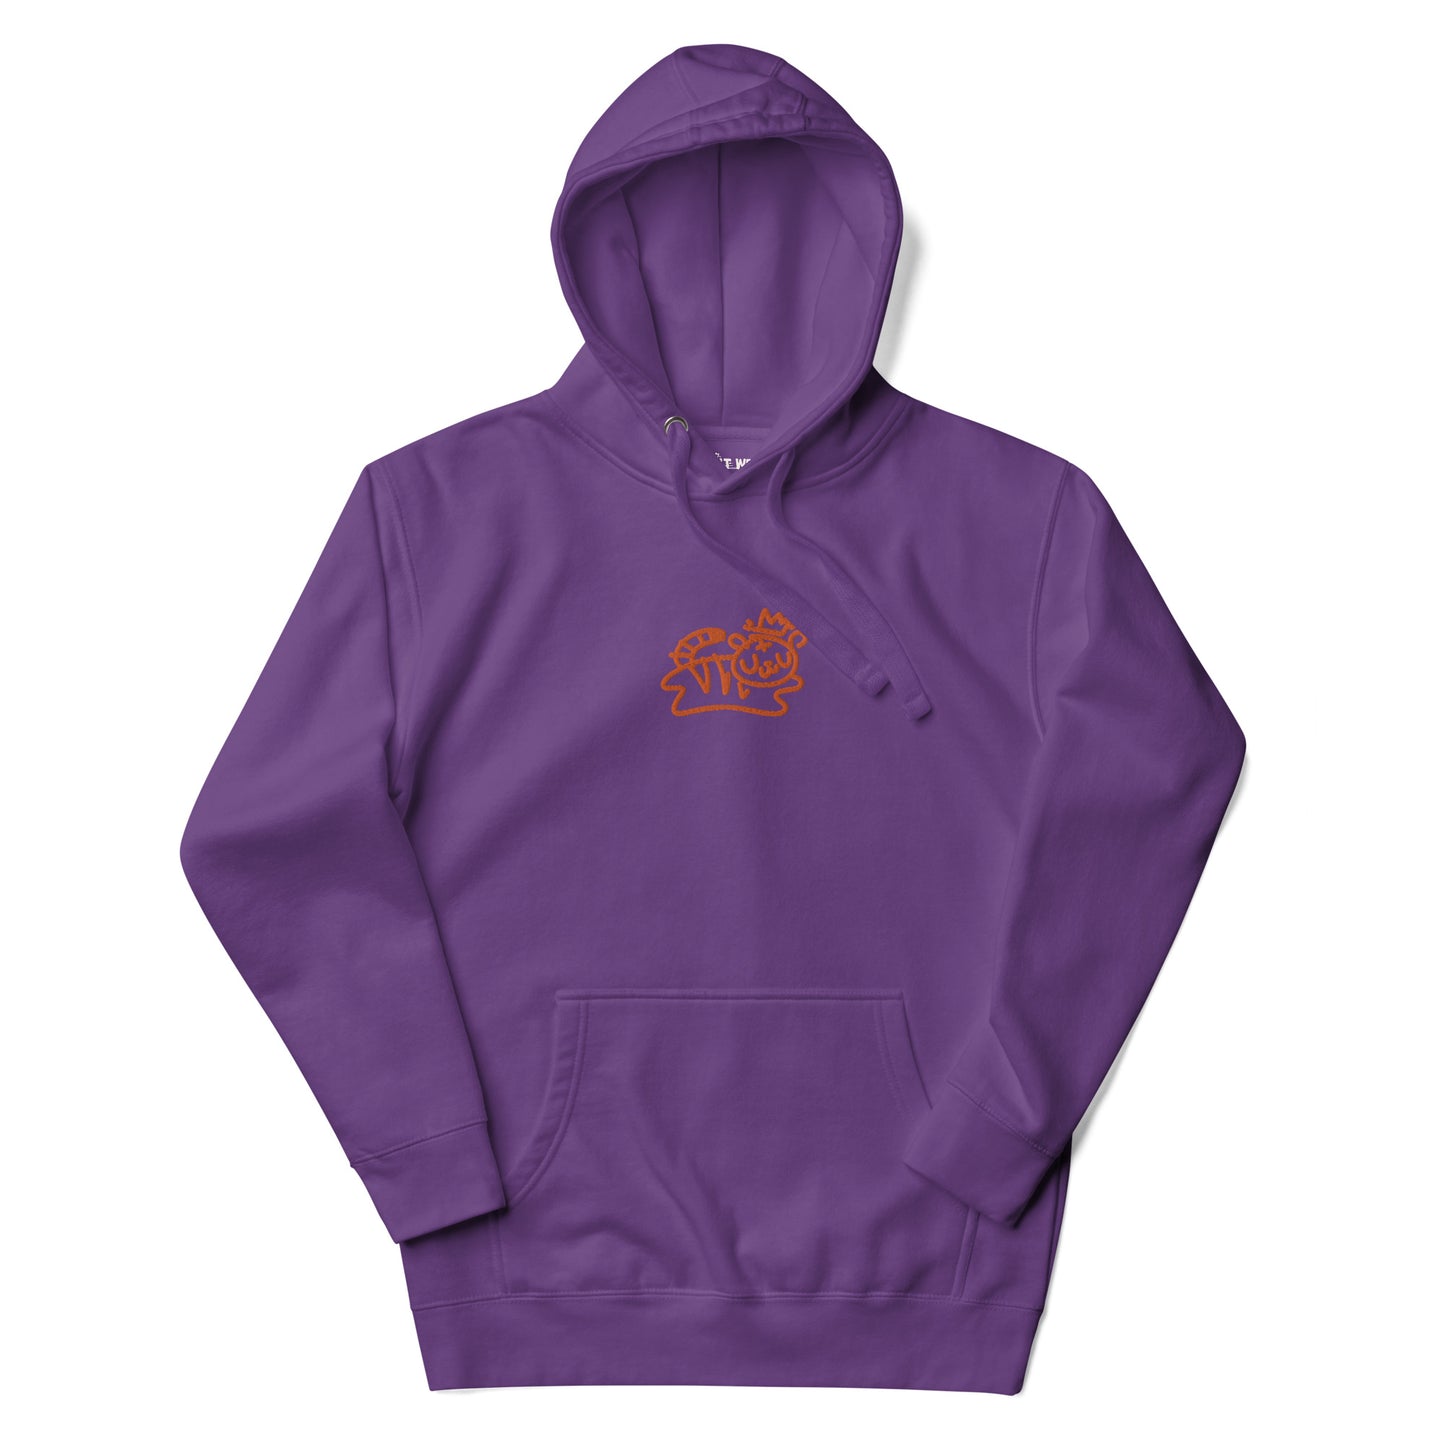 purple pullover hoodie with embroidered bolt-wear tiger logo on chest 